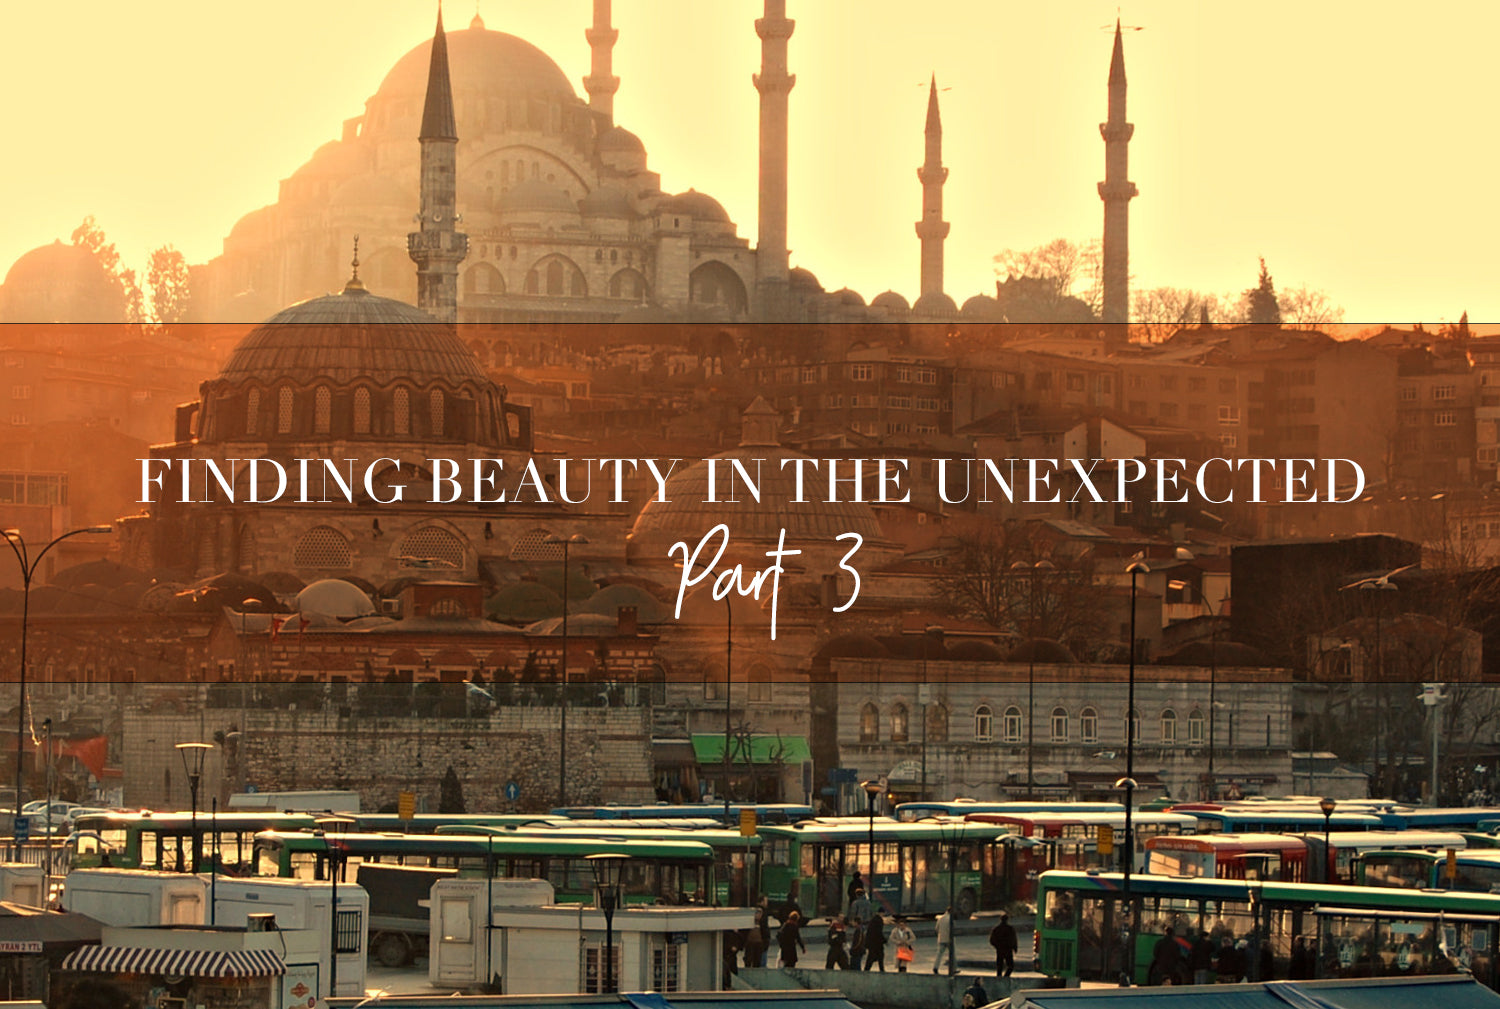 Finding beauty in the unexpected pt3